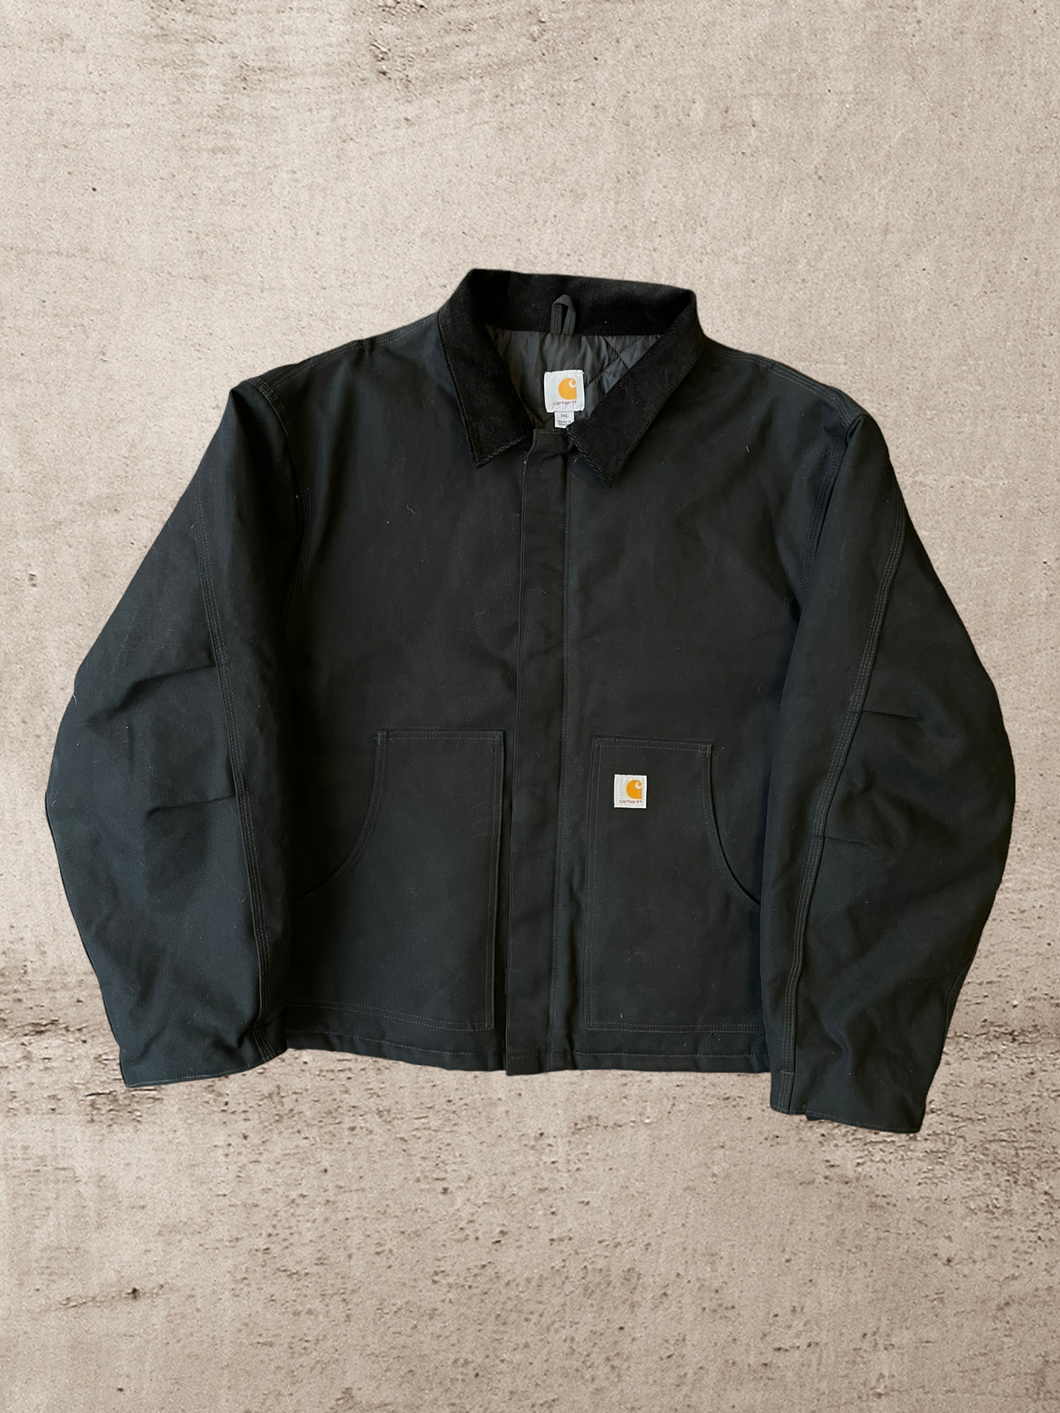 Carhartt Detroit Quilted Lined Jacket - XXL